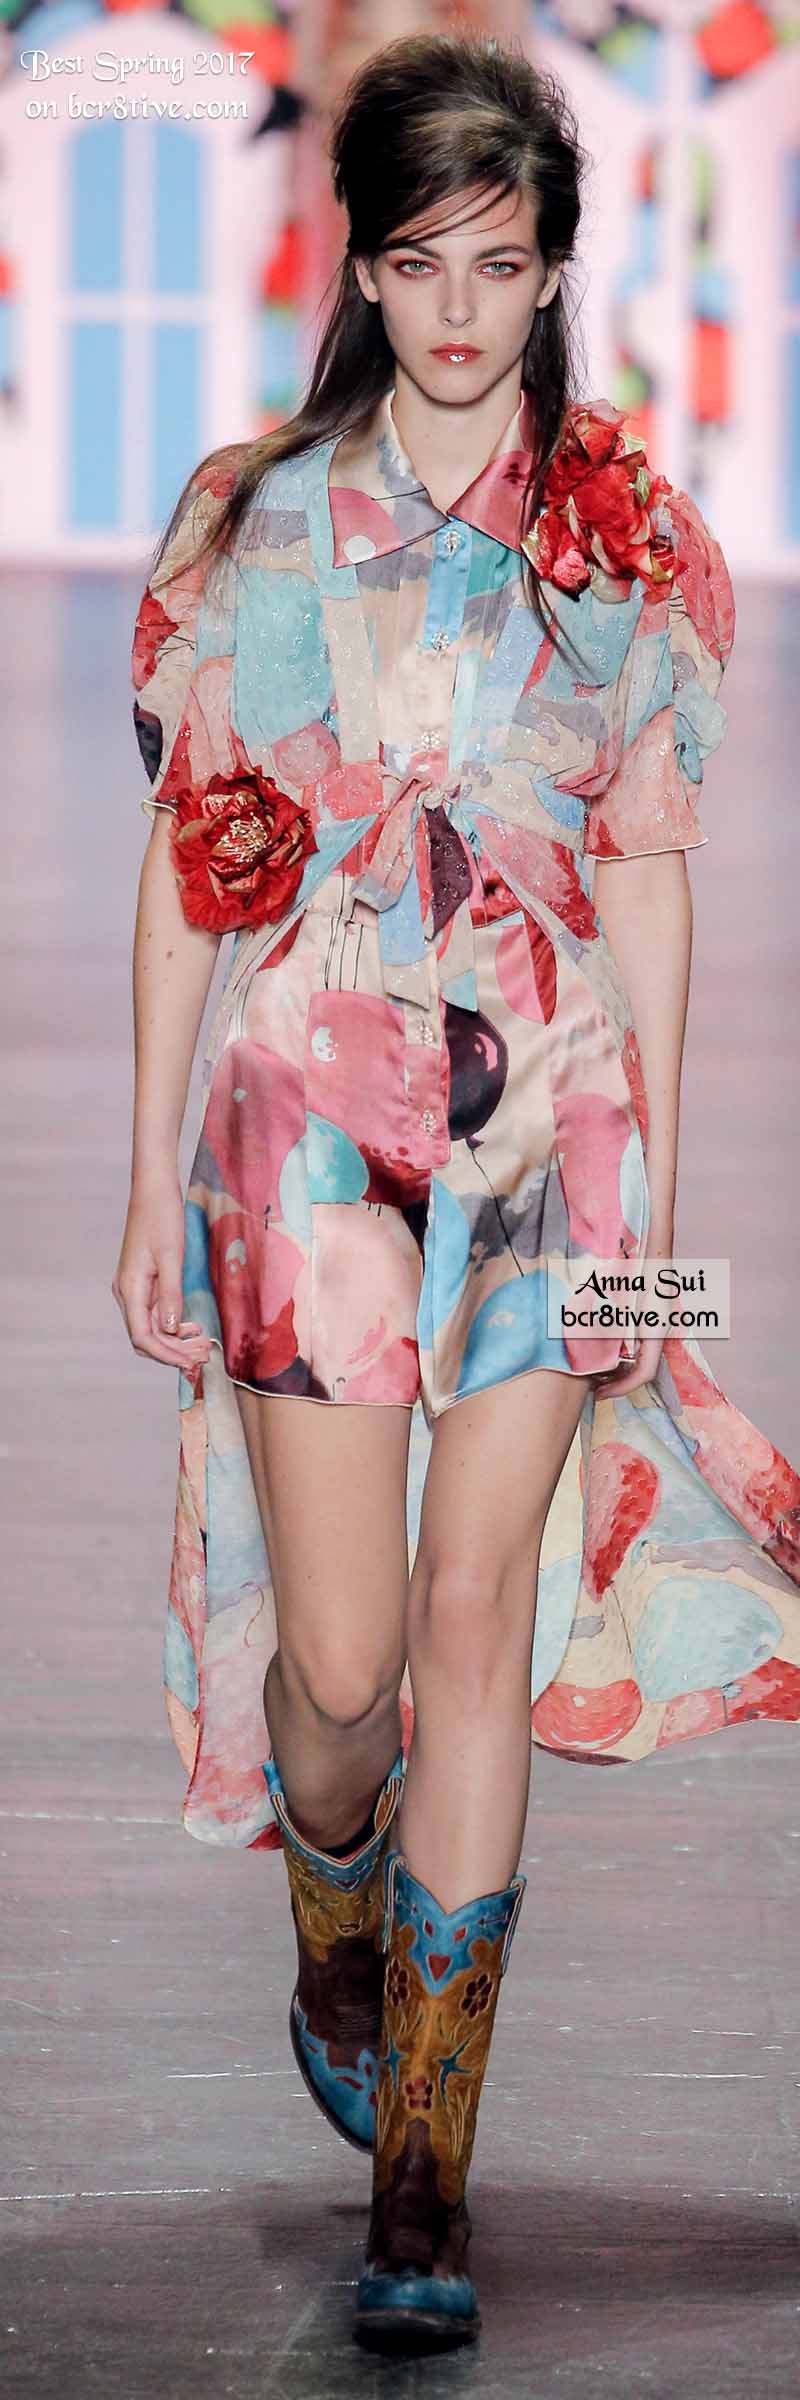 Anna Sui - The Best Looks from New York Fashion Week Spring 2017